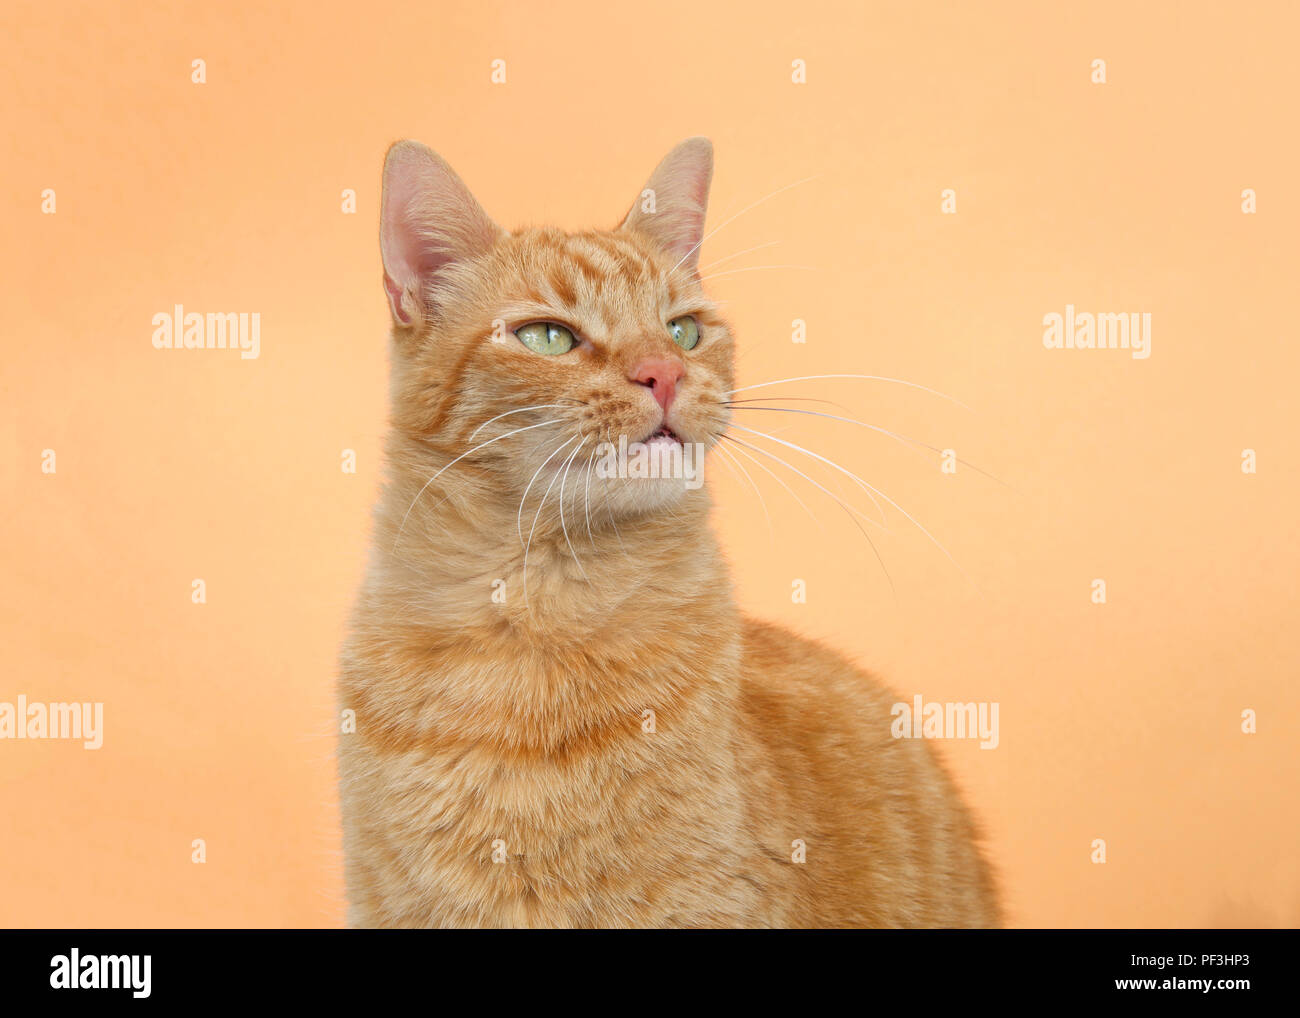 Portrait of one orange tabby ginger cat on an orange background. Looking up to viewers right with copy space. Stock Photo